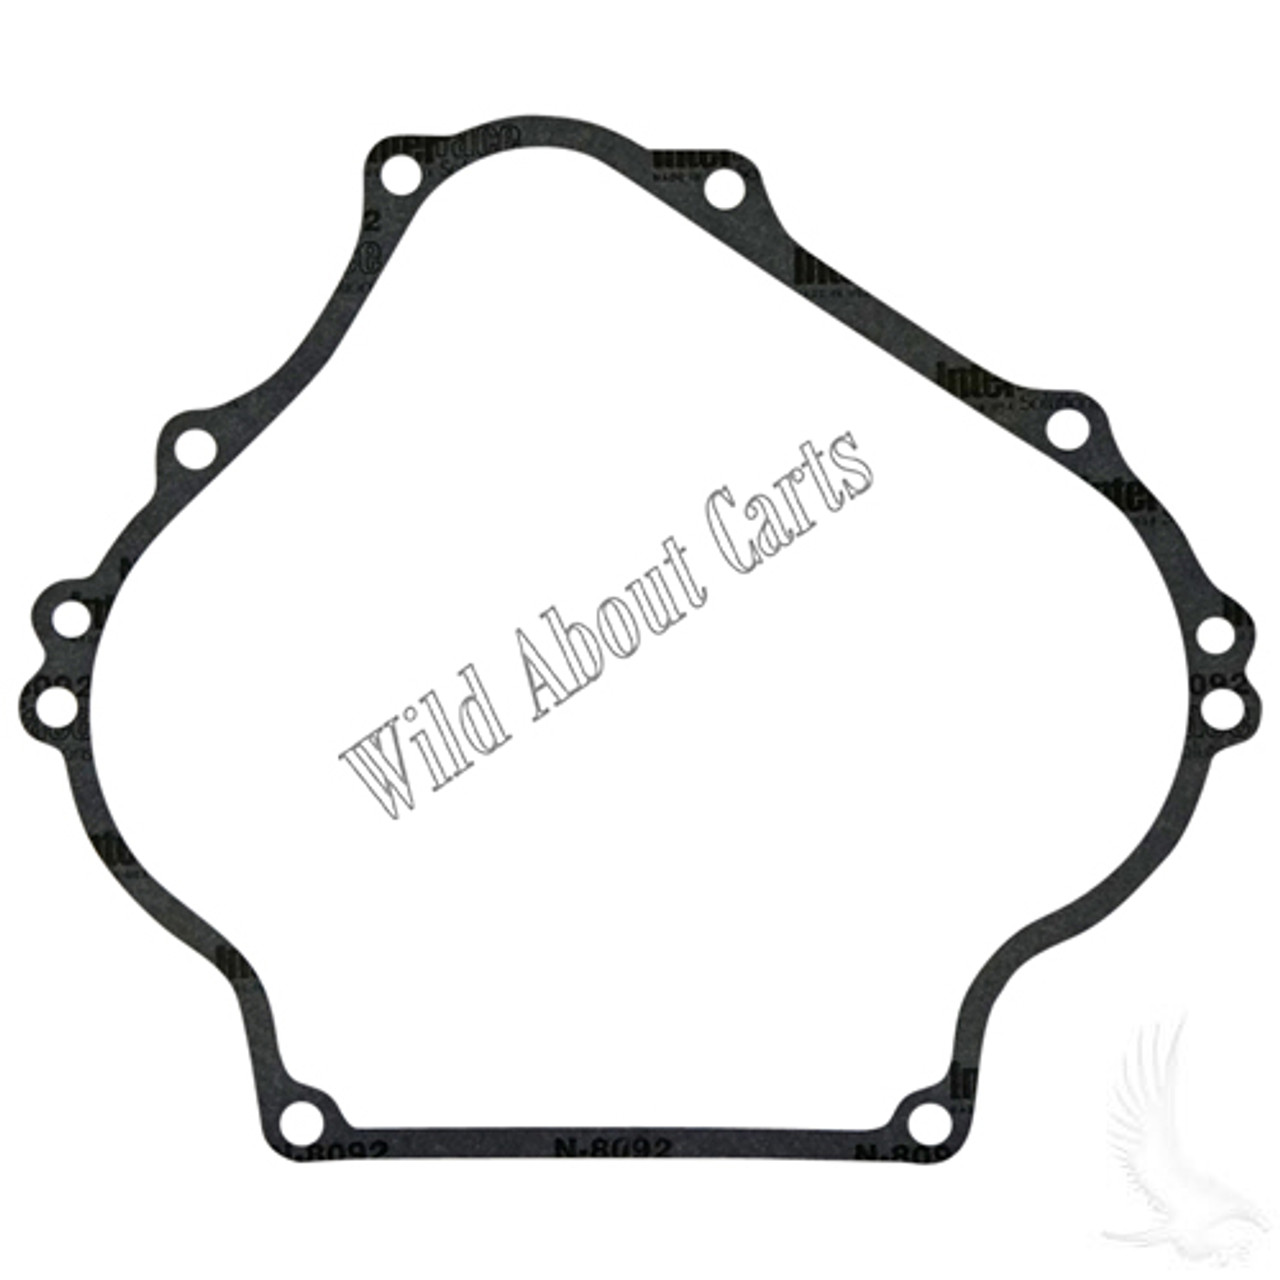 Club Car Crankcase Gasket (Years 1996-Up), 4761, ENG-168, 1017443